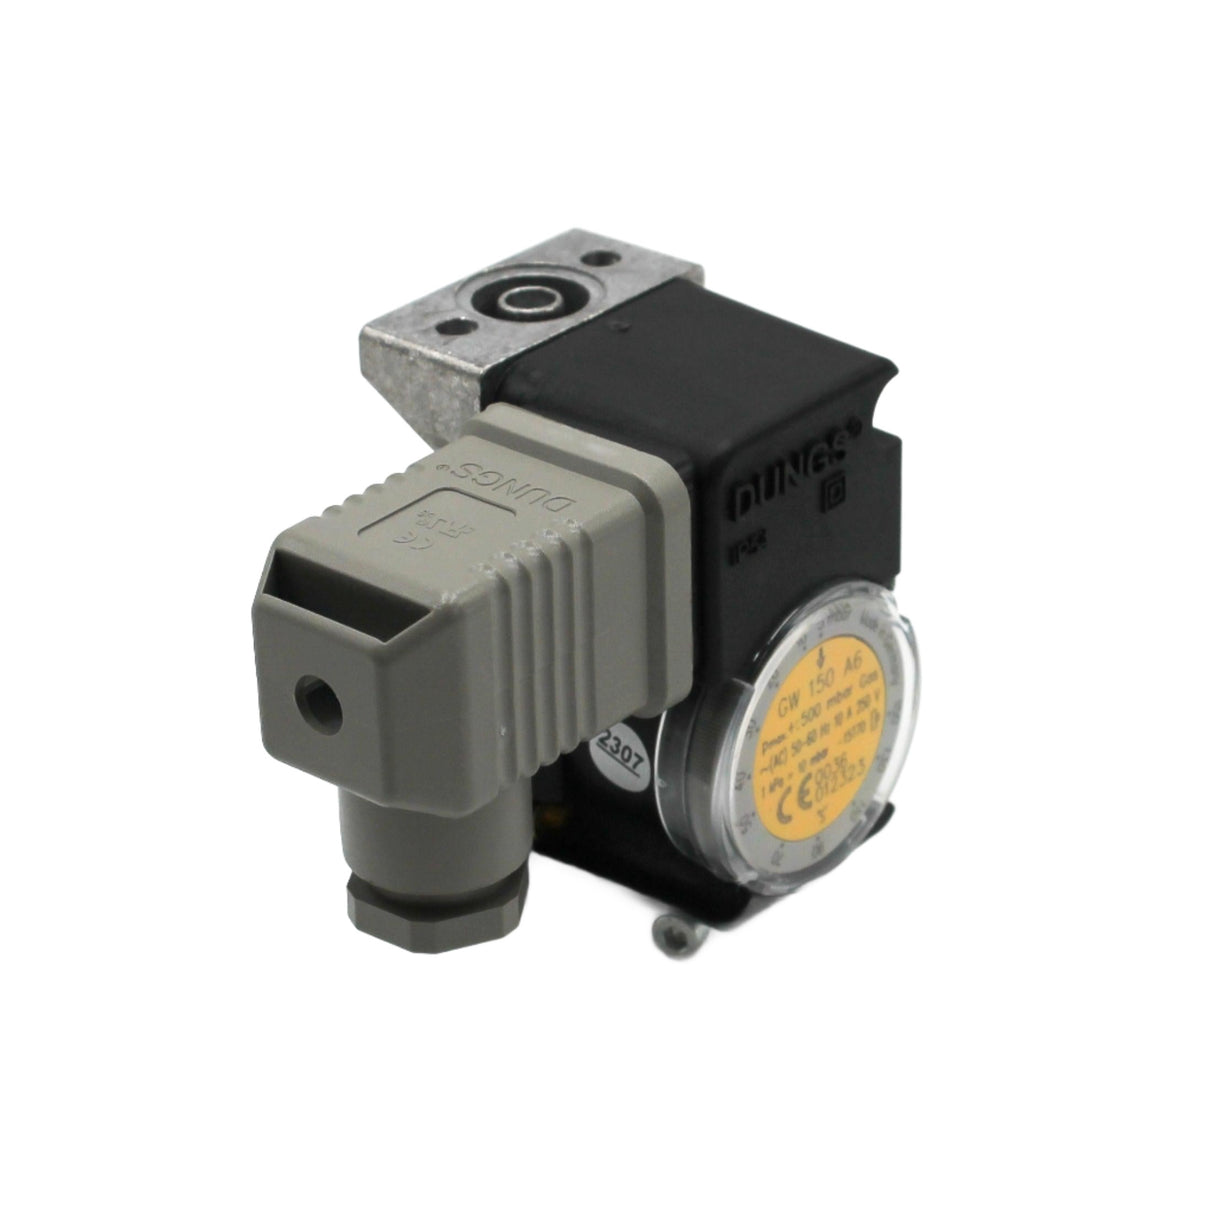 Dungs GW500 A6 100-500mbar Compact Pressure Switch